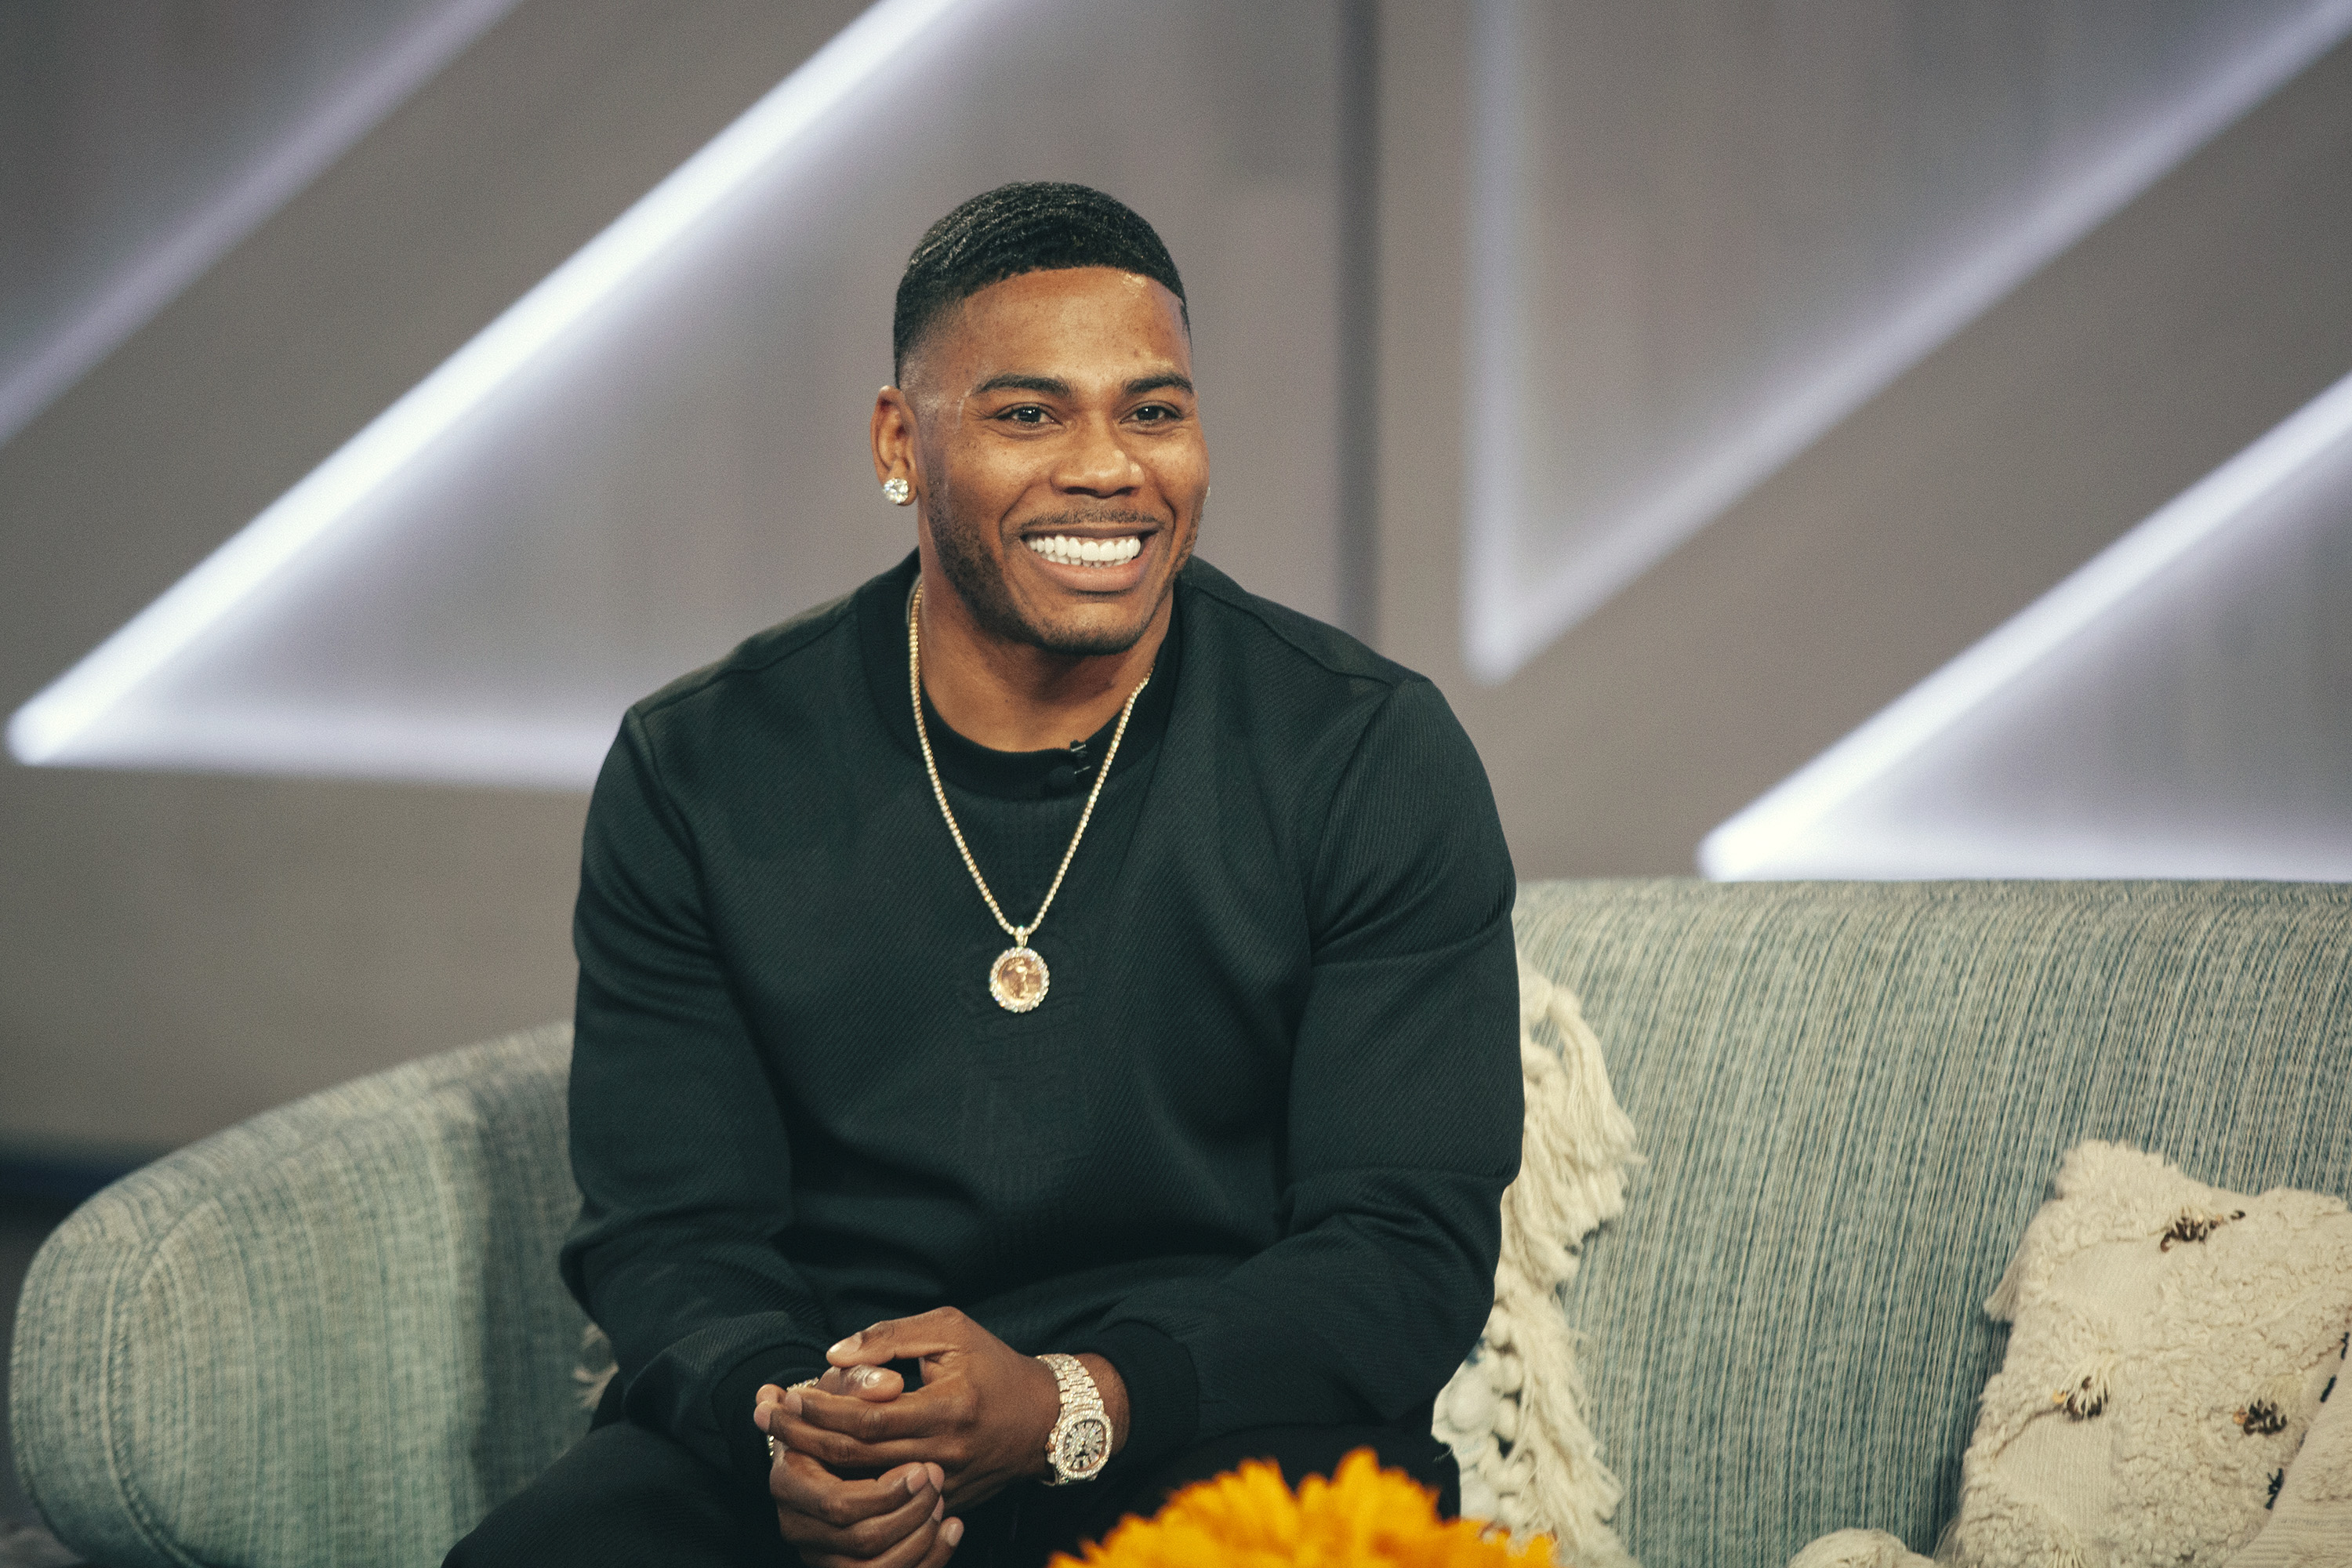 Nelly during his appearance on "The Kelly Clarkson Show" in December 2020. | Source: Getty Images